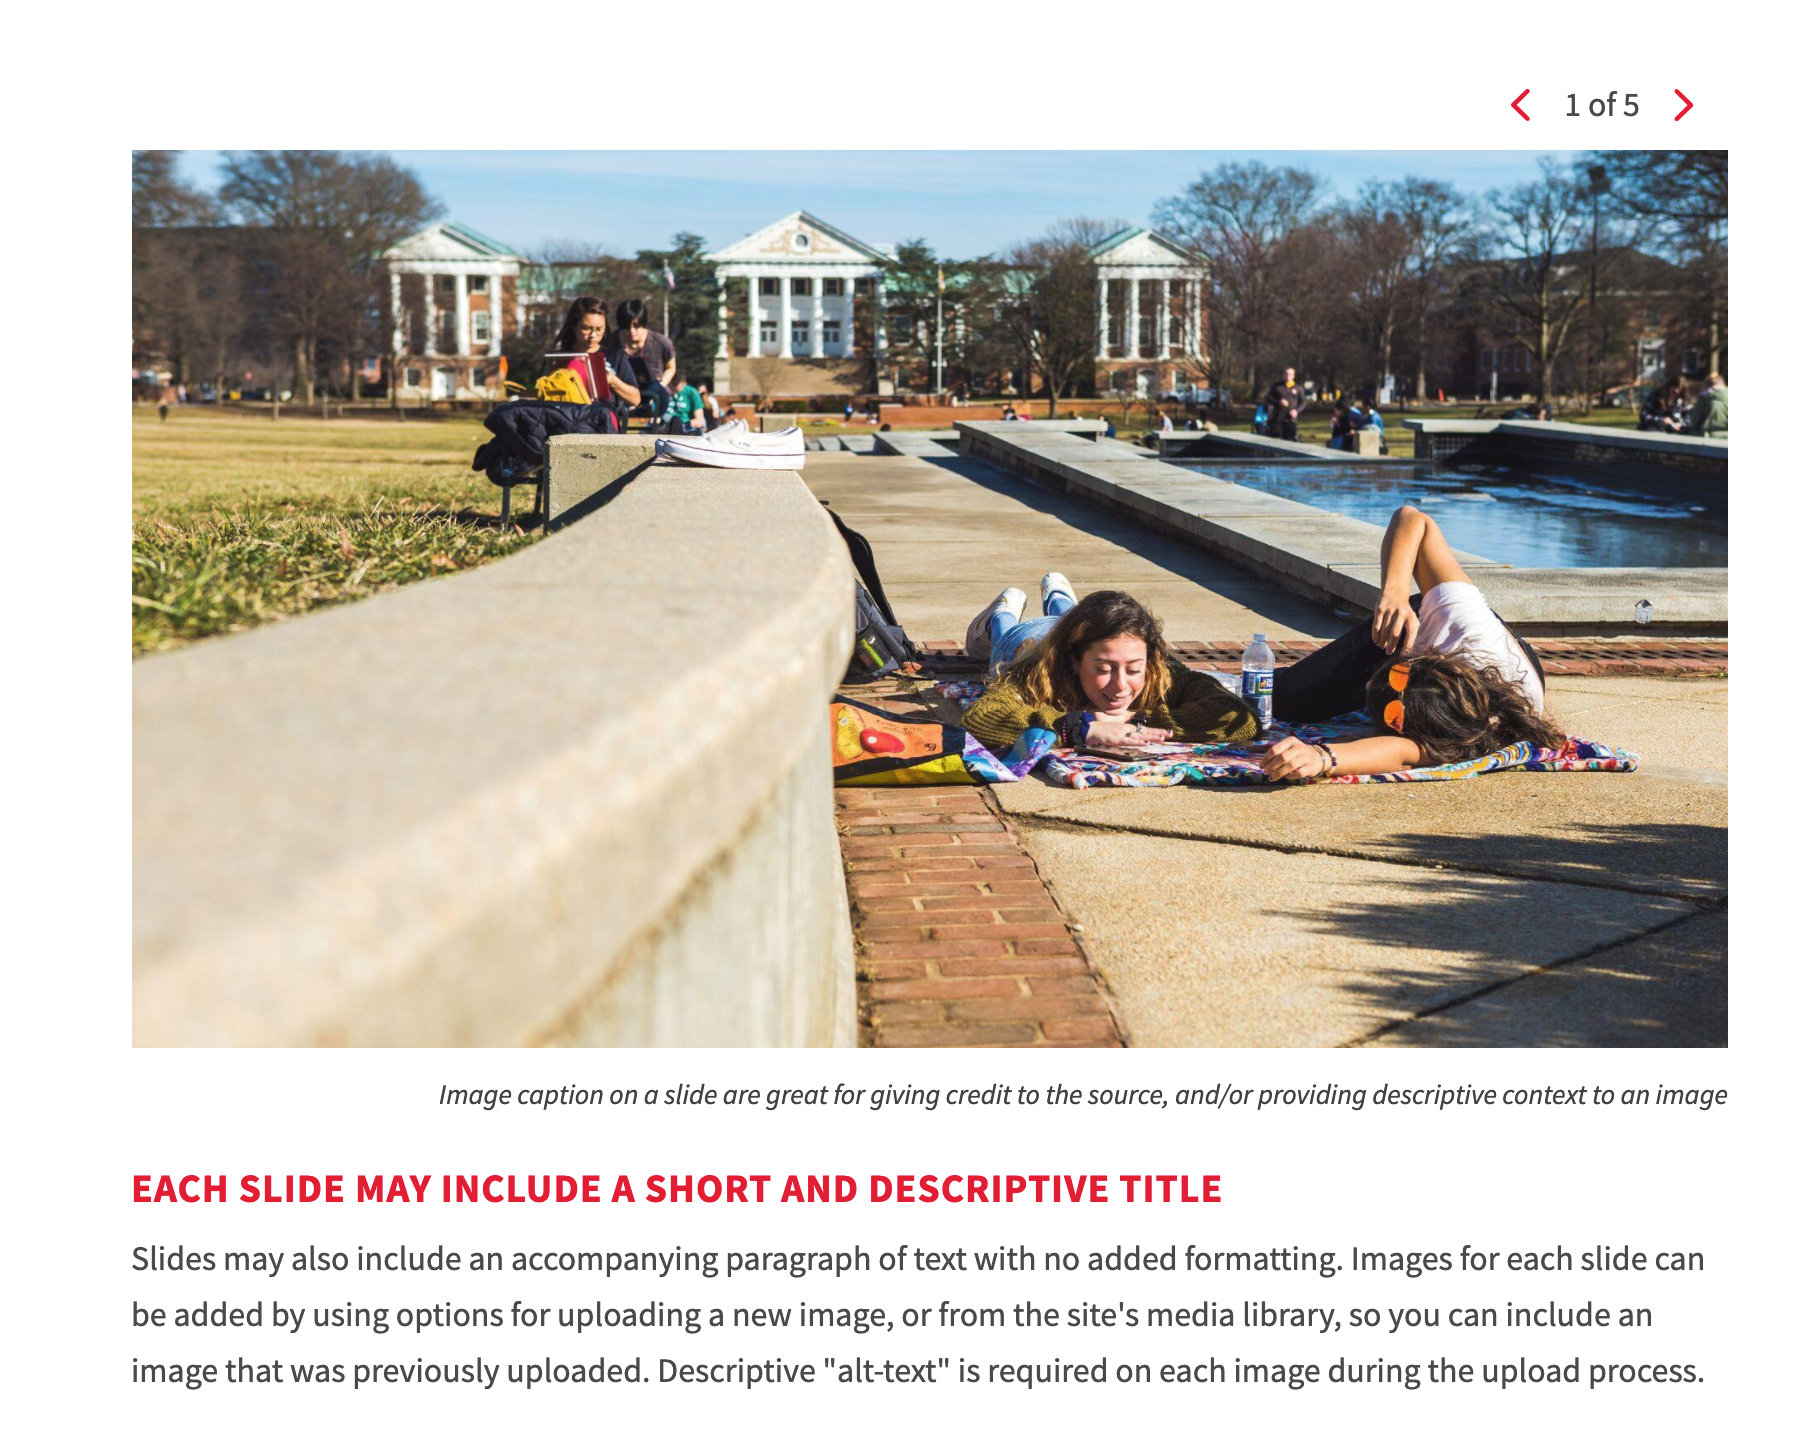 Screenshot of UMD's Styled Slideshow with an Image of students lounging on McKeldin Mall, and some filler text for the image caption, title and descriptive